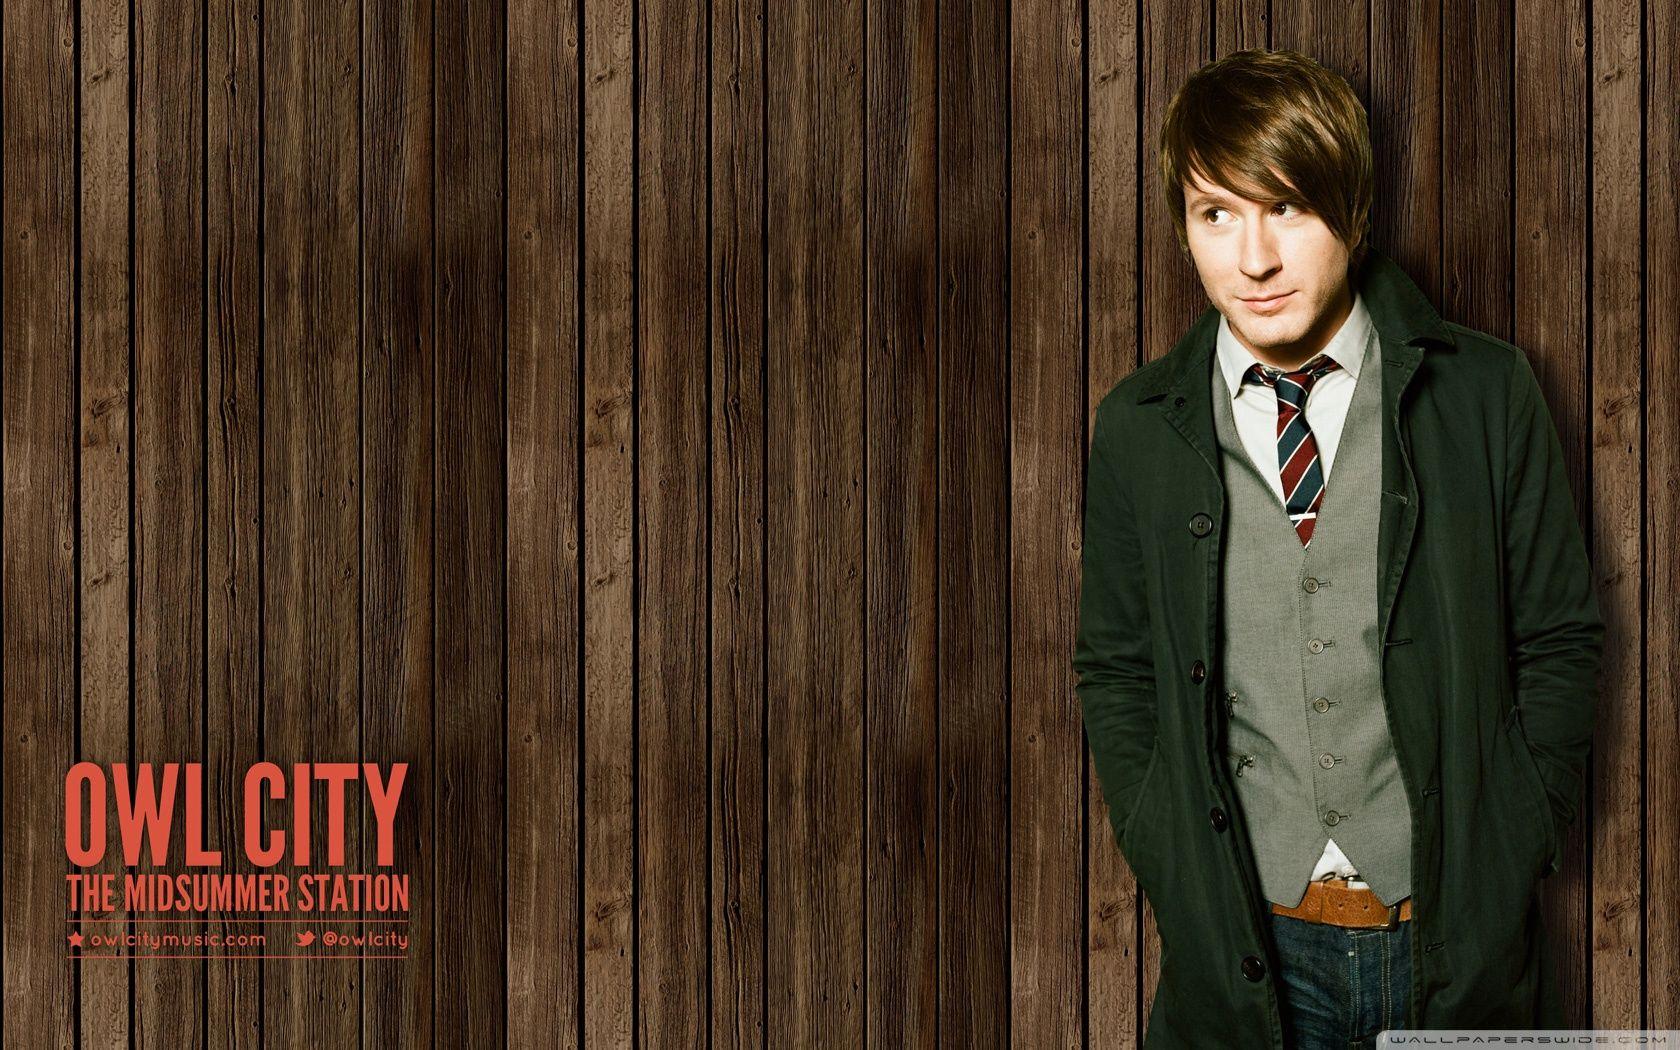 Owl City 2022. Owl City 2012. All things Bright and beautiful Owl City. Зарубежный исполнитель Owl City. Beautiful this city is